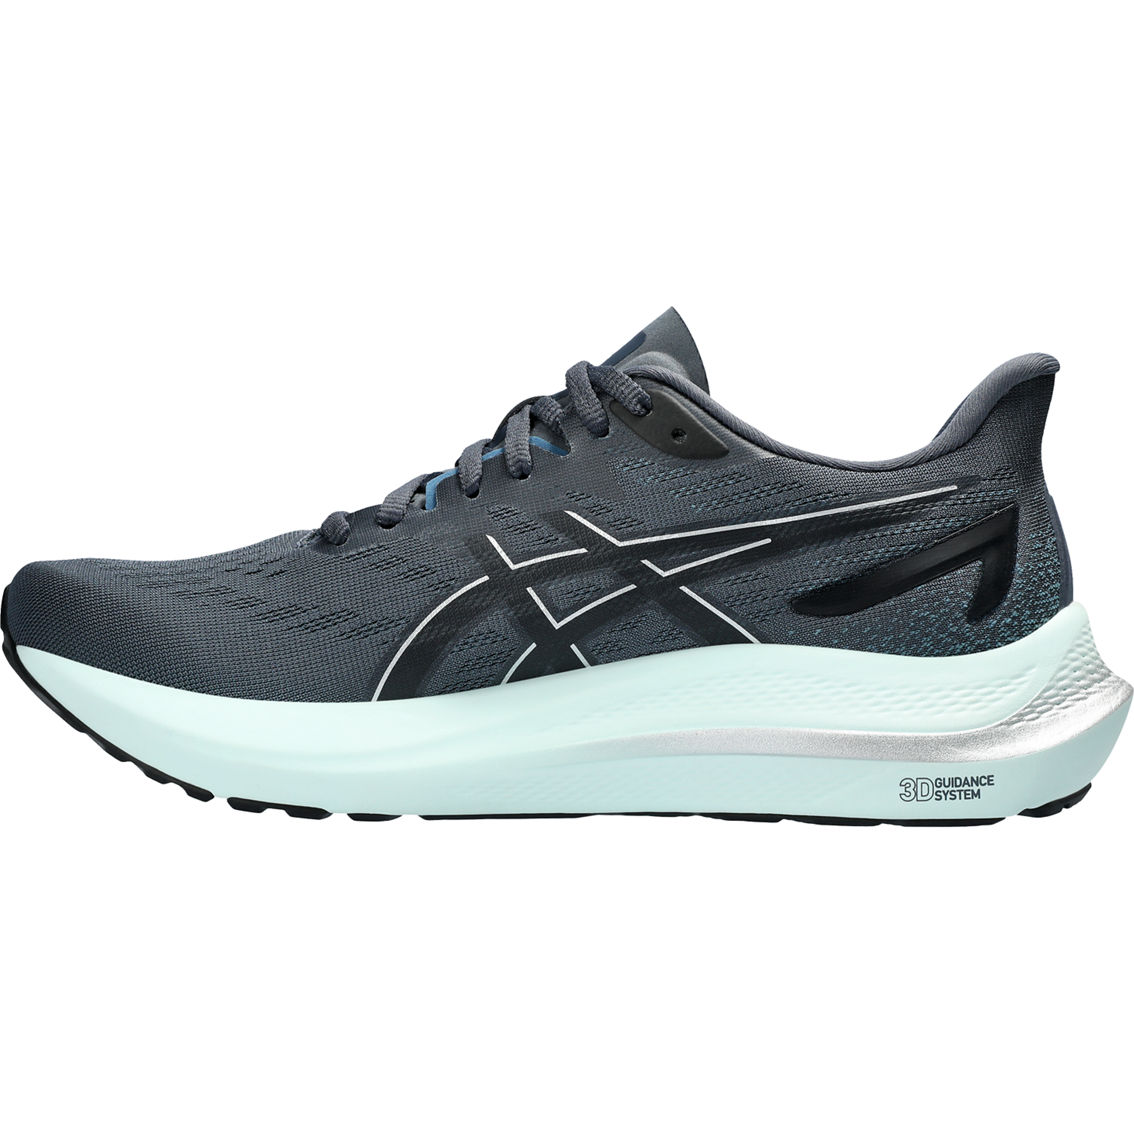 ASICS Women's GT 2000 12 Running Shoes - Image 3 of 7